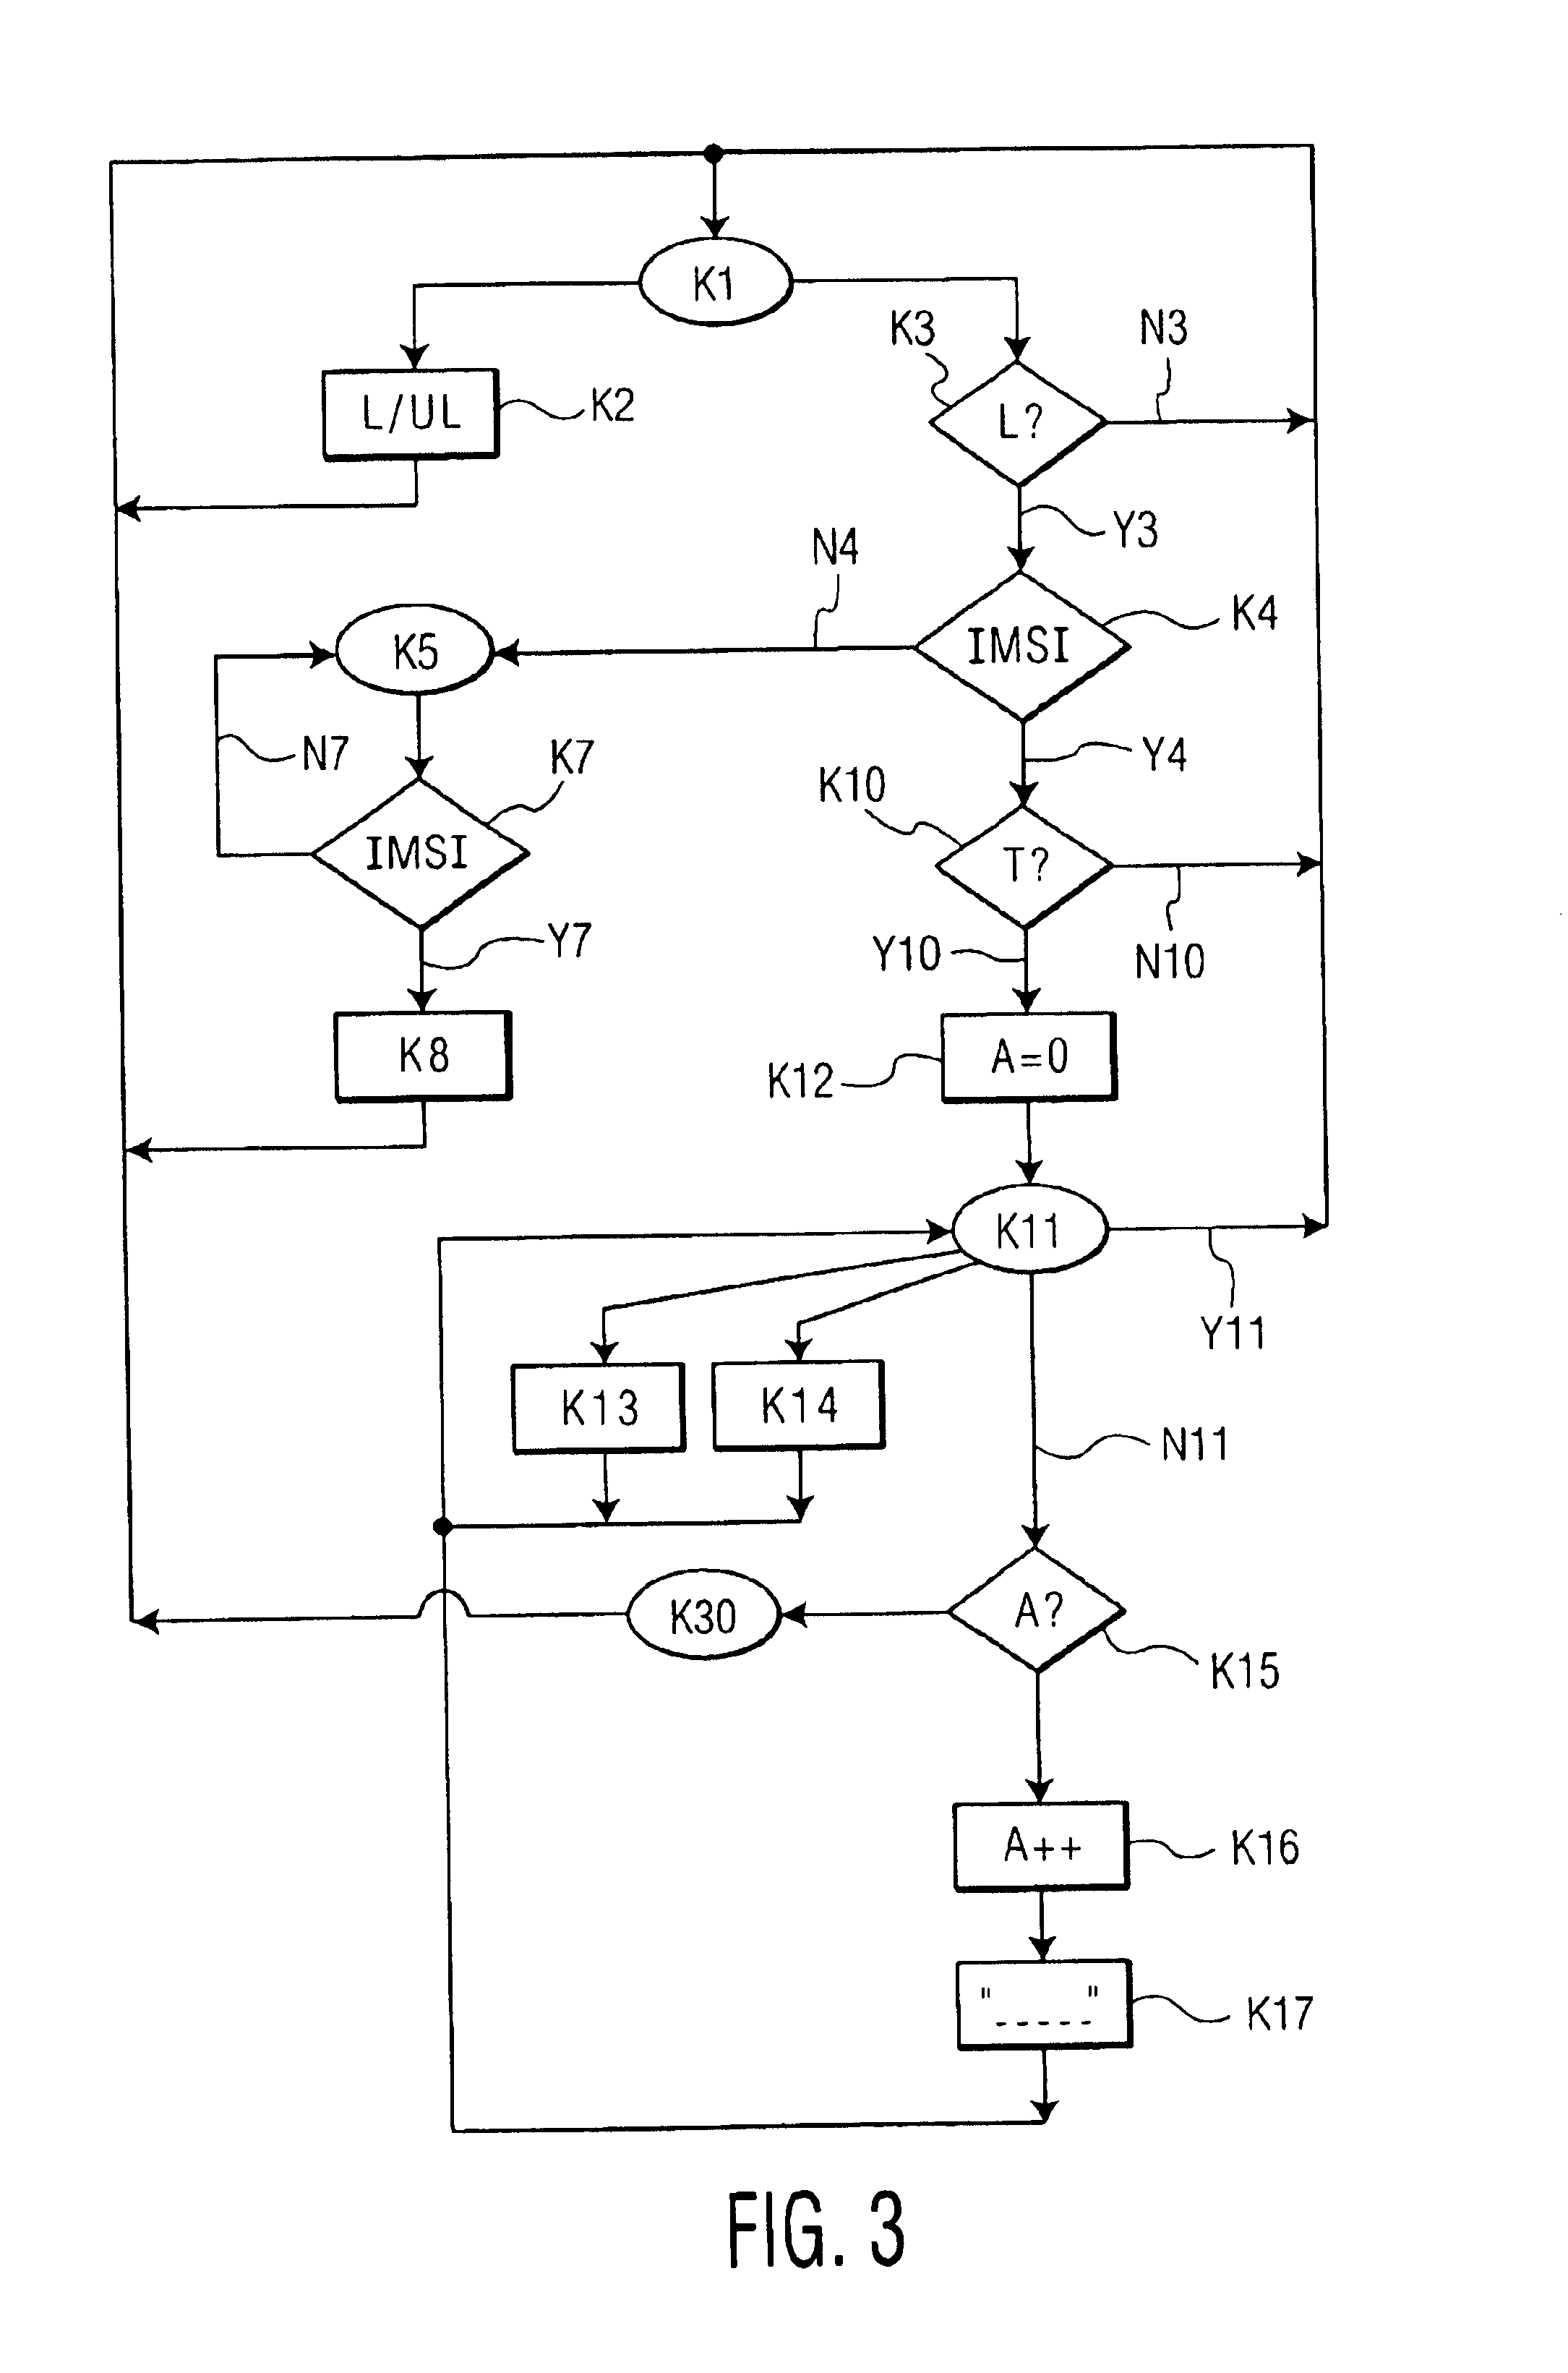 Anti-theft protection for a radiotelephony device